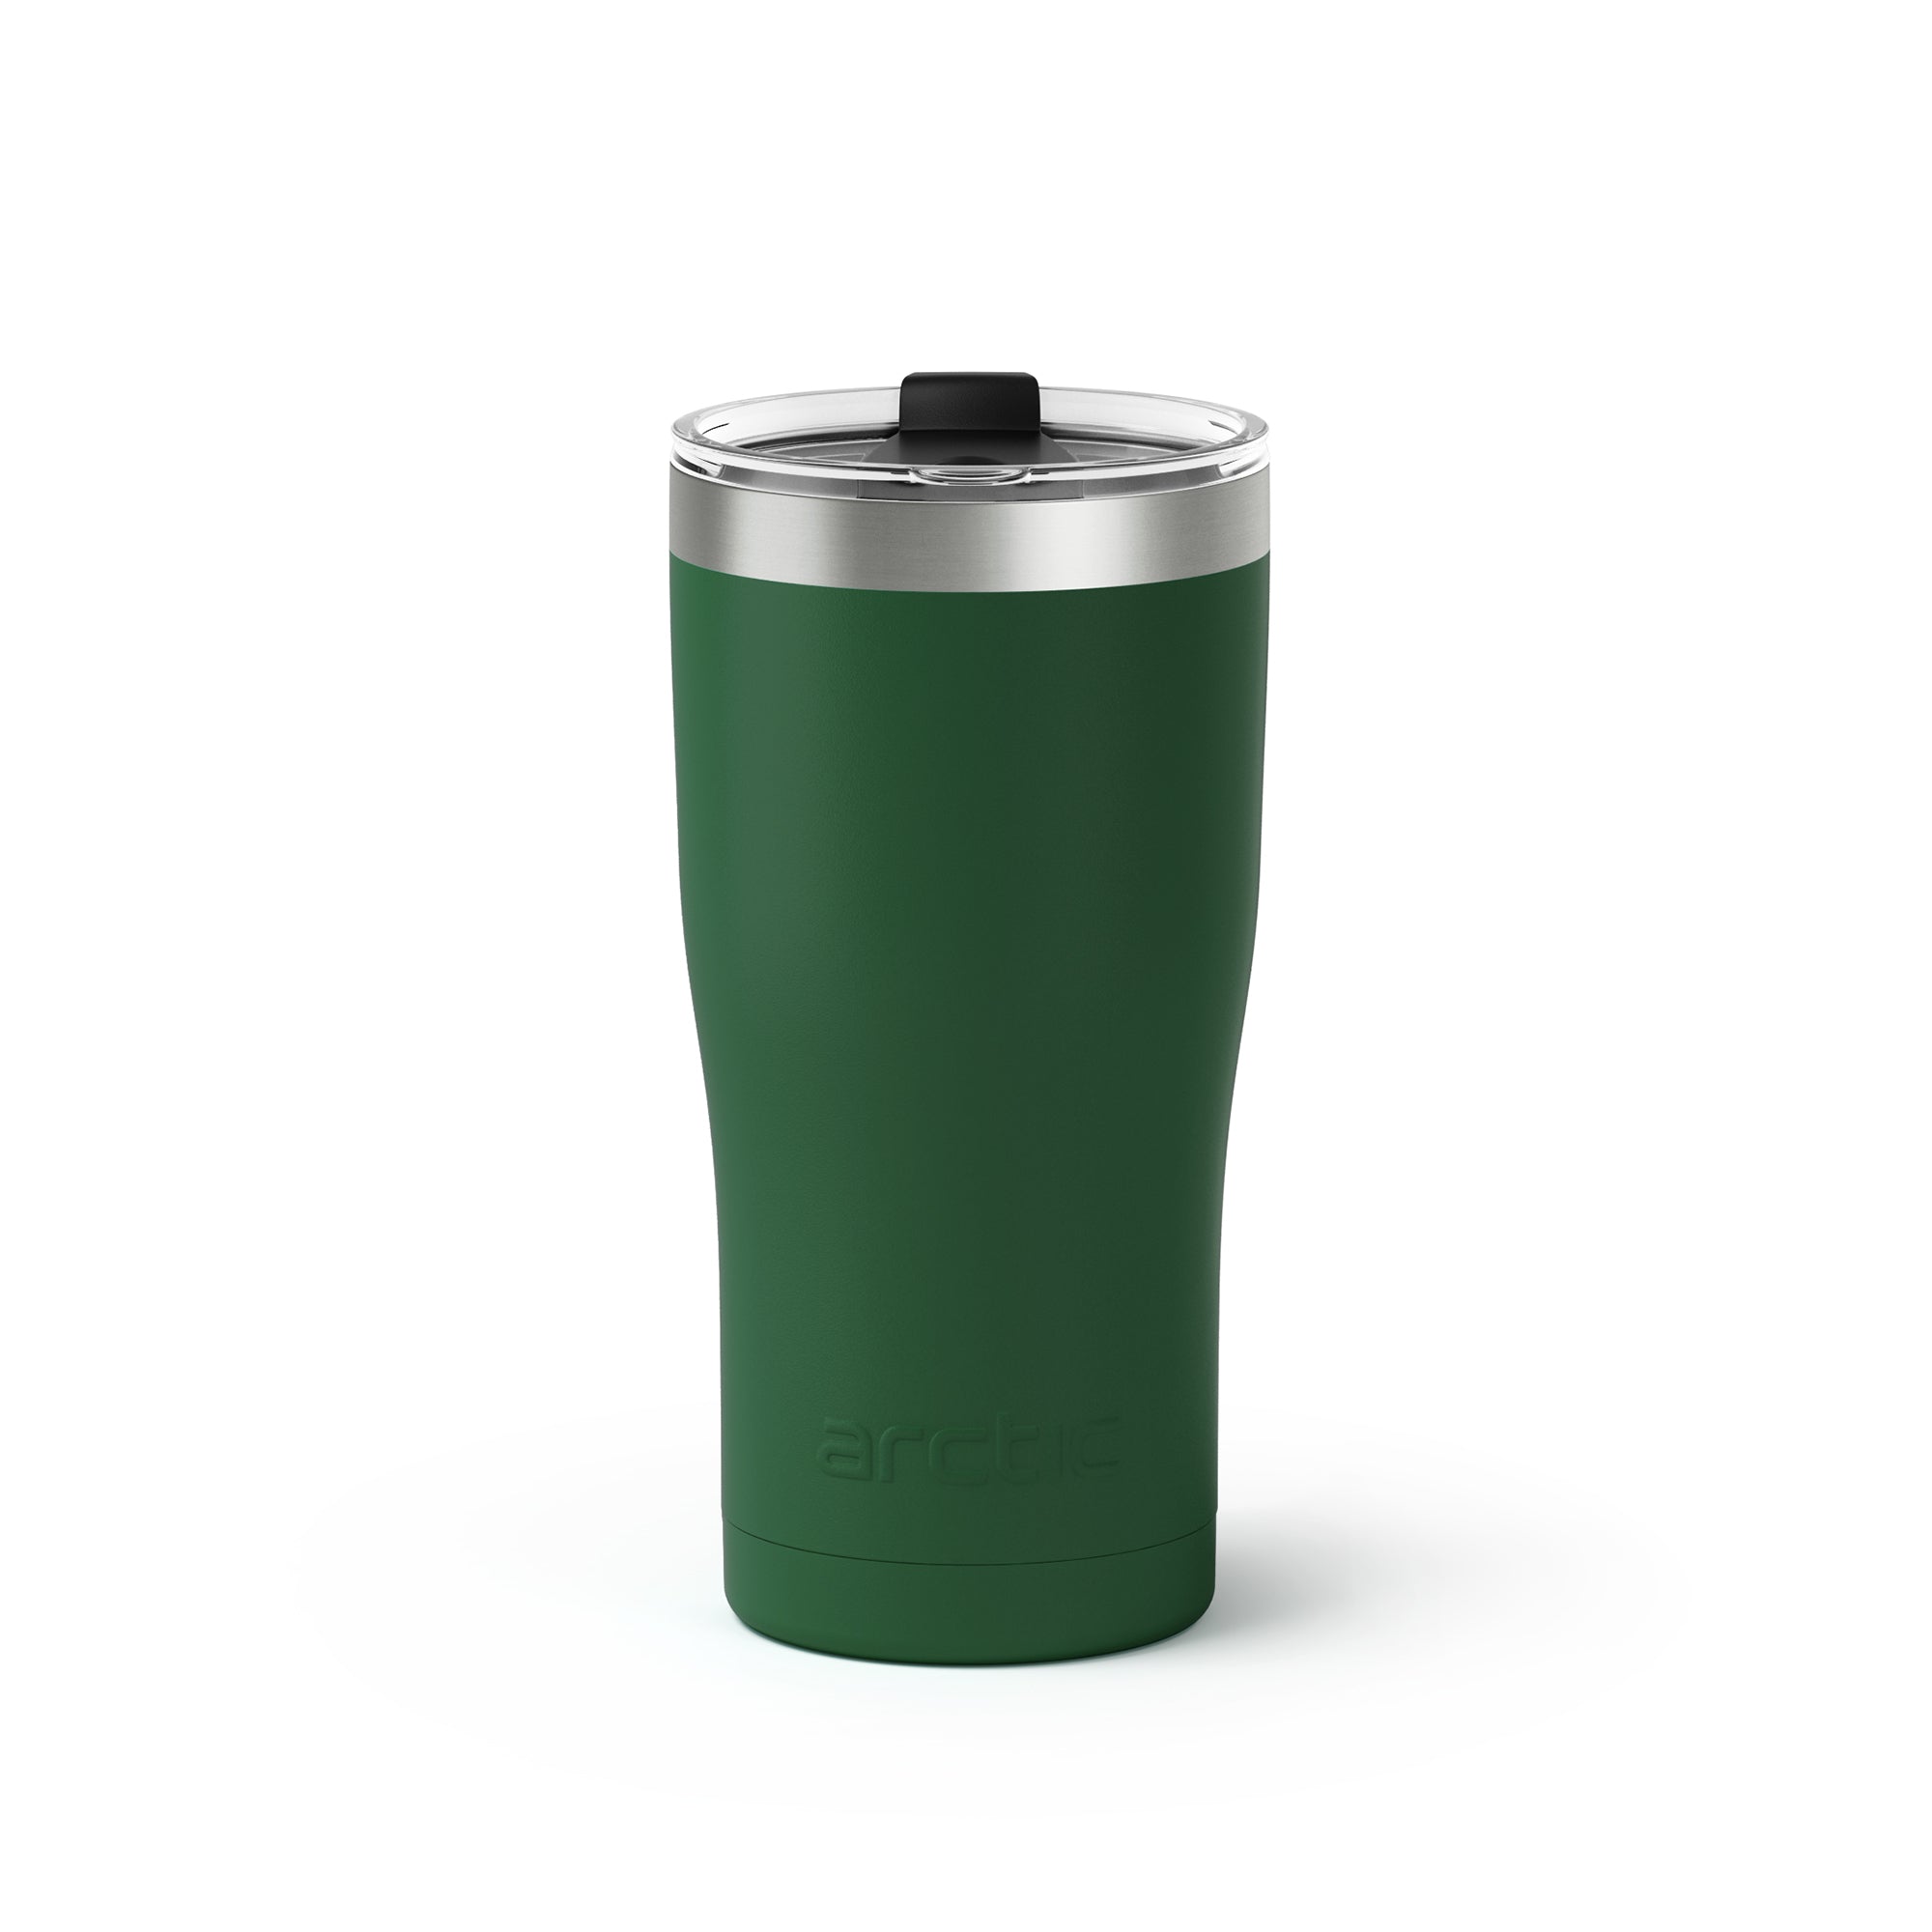 20 Oz Insulated Tumbler with Lid and Straw, Cute Cartoon Green Avocado  Simple Modern Mom Dad Thermos…See more 20 Oz Insulated Tumbler with Lid and